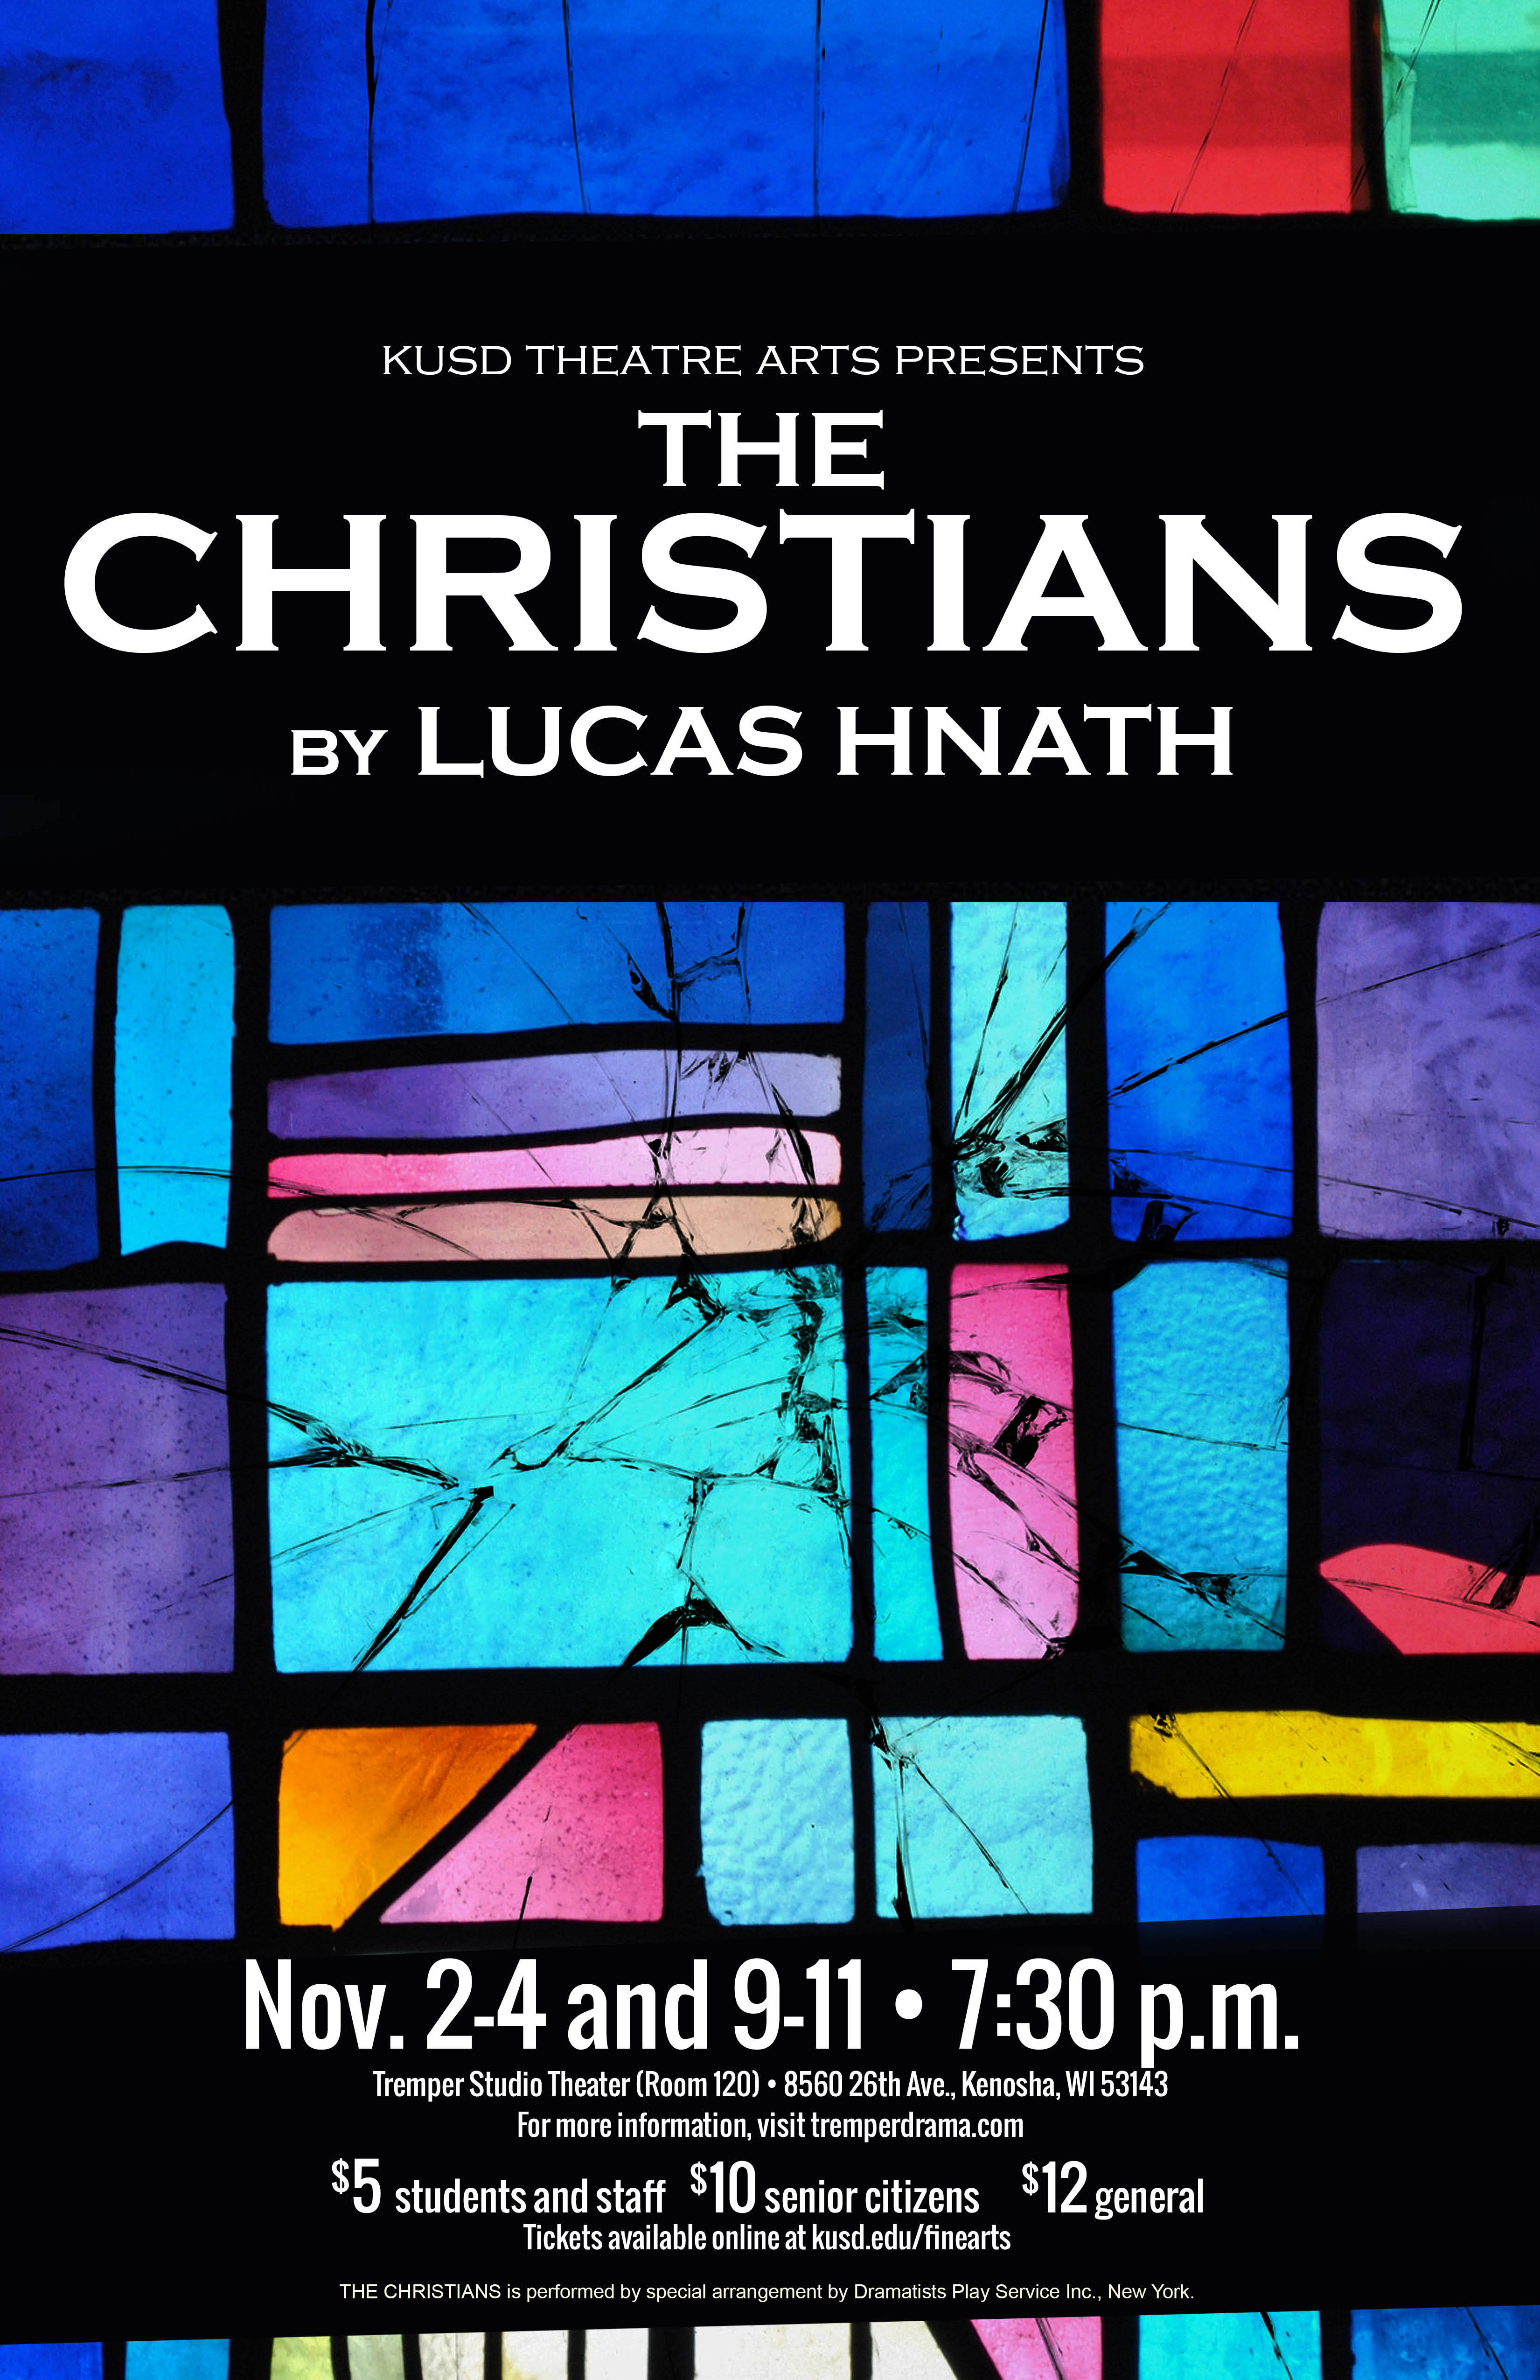 The Poster for The Christians